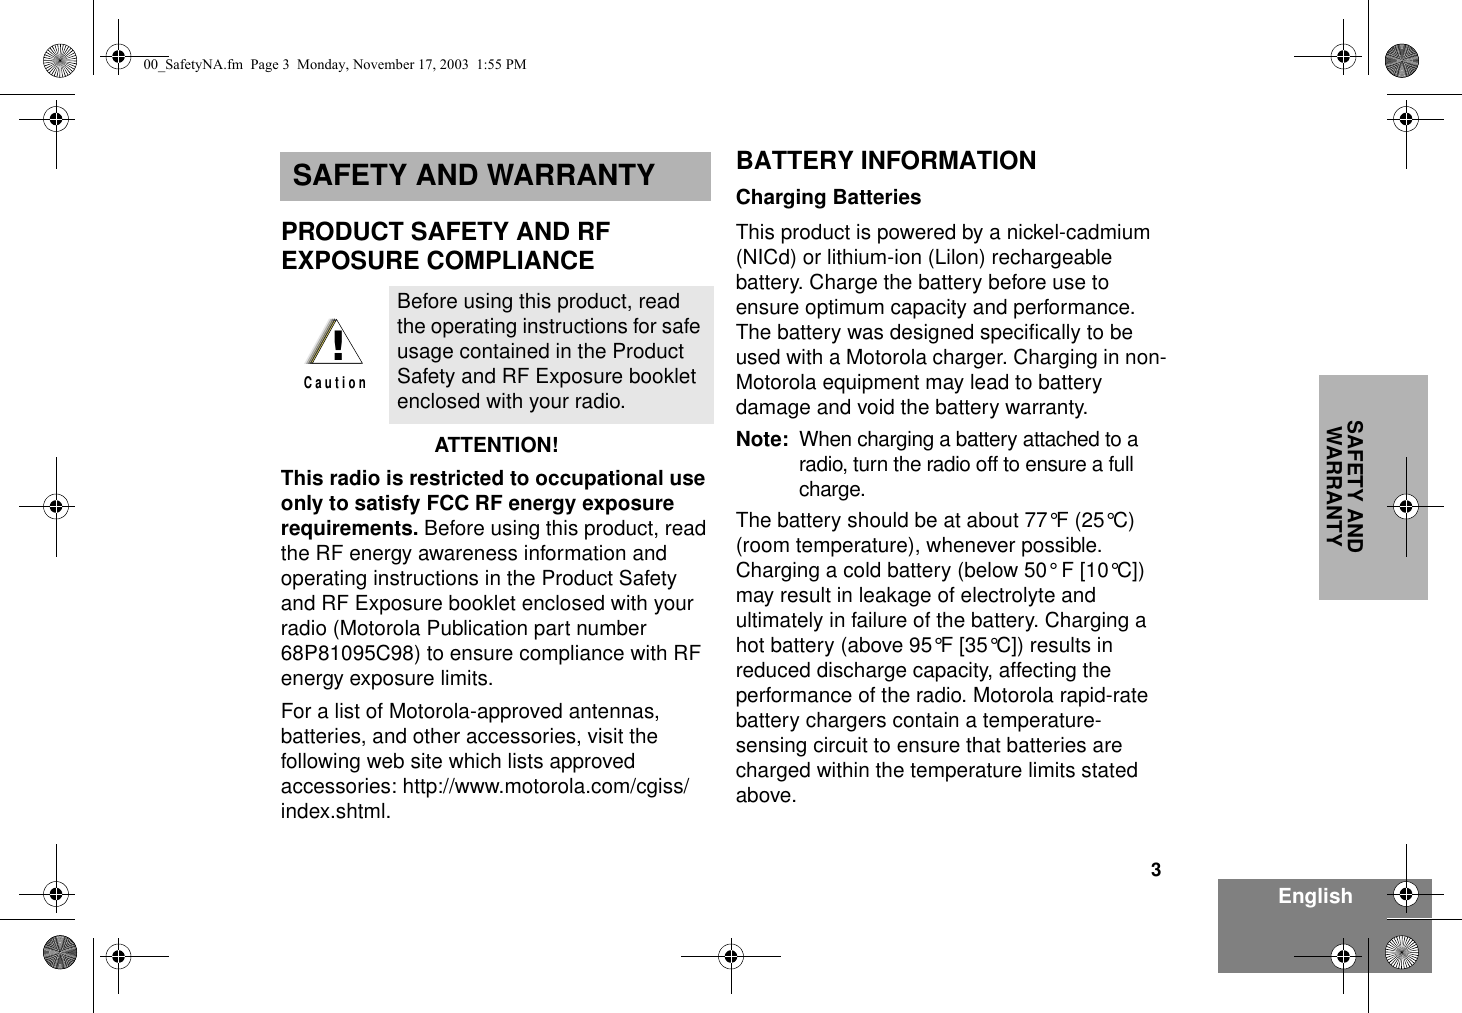 3EnglishSAFETY AND WARRANTYSAFETY AND WARRANTYPRODUCT SAFETY AND RF EXPOSURE COMPLIANCEATTENTION!  This radio is restricted to occupational use only to satisfy FCC RF energy exposure requirements. Before using this product, read the RF energy awareness information and operating instructions in the Product Safety and RF Exposure booklet enclosed with your radio (Motorola Publication part number 68P81095C98) to ensure compliance with RF energy exposure limits.  For a list of Motorola-approved antennas, batteries, and other accessories, visit the following web site which lists approved accessories: http://www.motorola.com/cgiss/index.shtml.BATTERY INFORMATIONCharging BatteriesThis product is powered by a nickel-cadmium (NICd) or lithium-ion (Lilon) rechargeable battery. Charge the battery before use to ensure optimum capacity and performance. The battery was designed specifically to be used with a Motorola charger. Charging in non-Motorola equipment may lead to battery damage and void the battery warranty.Note: When charging a battery attached to a radio, turn the radio off to ensure a full charge.The battery should be at about 77°F (25°C) (room temperature), whenever possible. Charging a cold battery (below 50° F [10°C]) may result in leakage of electrolyte and ultimately in failure of the battery. Charging a hot battery (above 95°F [35°C]) results in reduced discharge capacity, affecting the performance of the radio. Motorola rapid-rate battery chargers contain a temperature-sensing circuit to ensure that batteries are charged within the temperature limits stated above.Before using this product, read the operating instructions for safe usage contained in the Product Safety and RF Exposure booklet enclosed with your radio.!C a u t i o n00_SafetyNA.fm  Page 3  Monday, November 17, 2003  1:55 PM